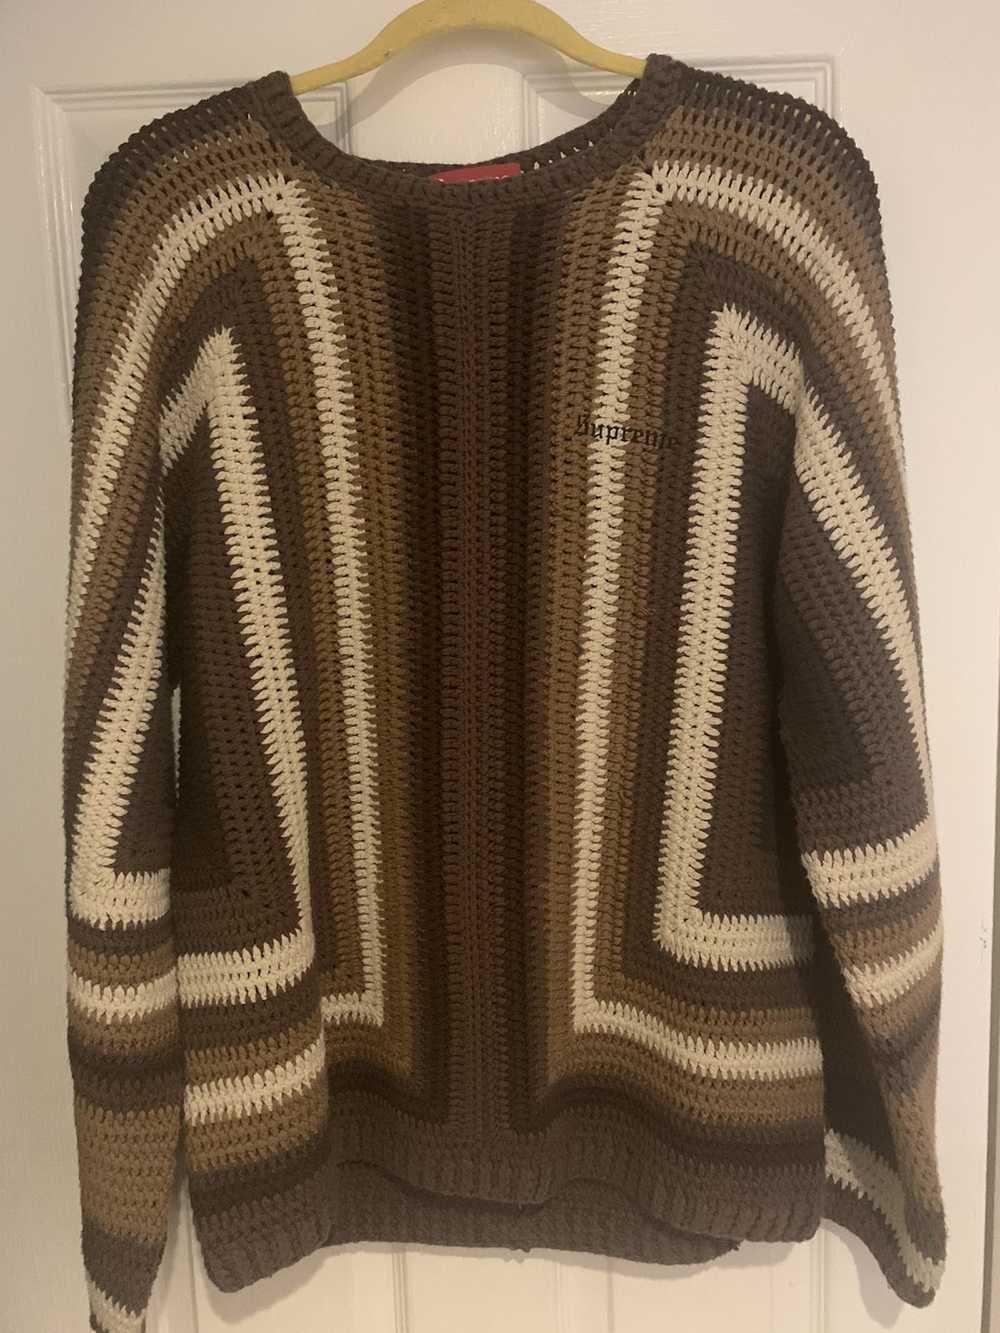 Streetwear × Supreme Supreme Hand Knitted Sweater - image 1